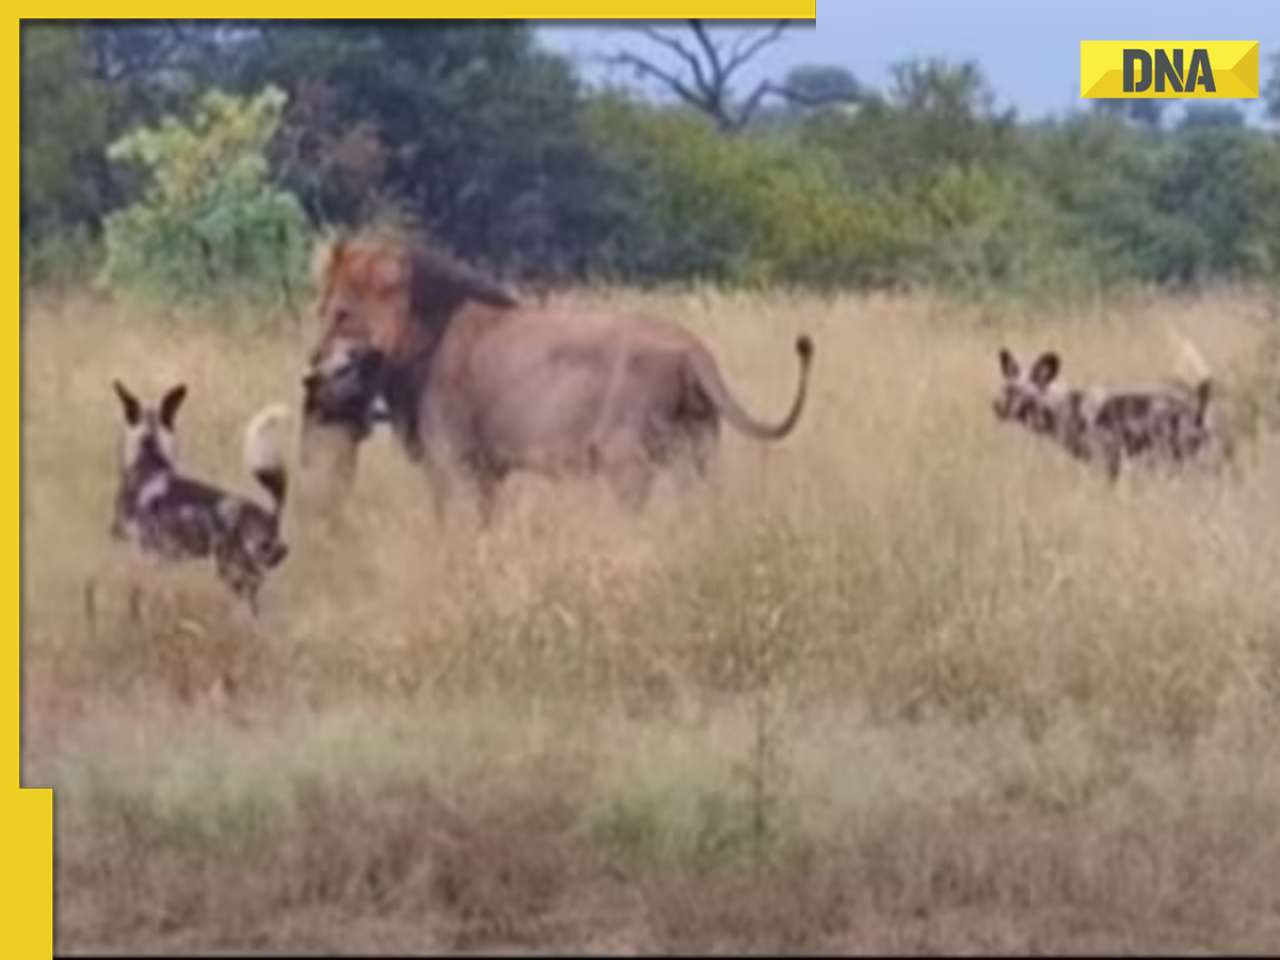 Viral video: Wild dogs helplessly witness lion's deadly attack on their 'brother', internet reacts